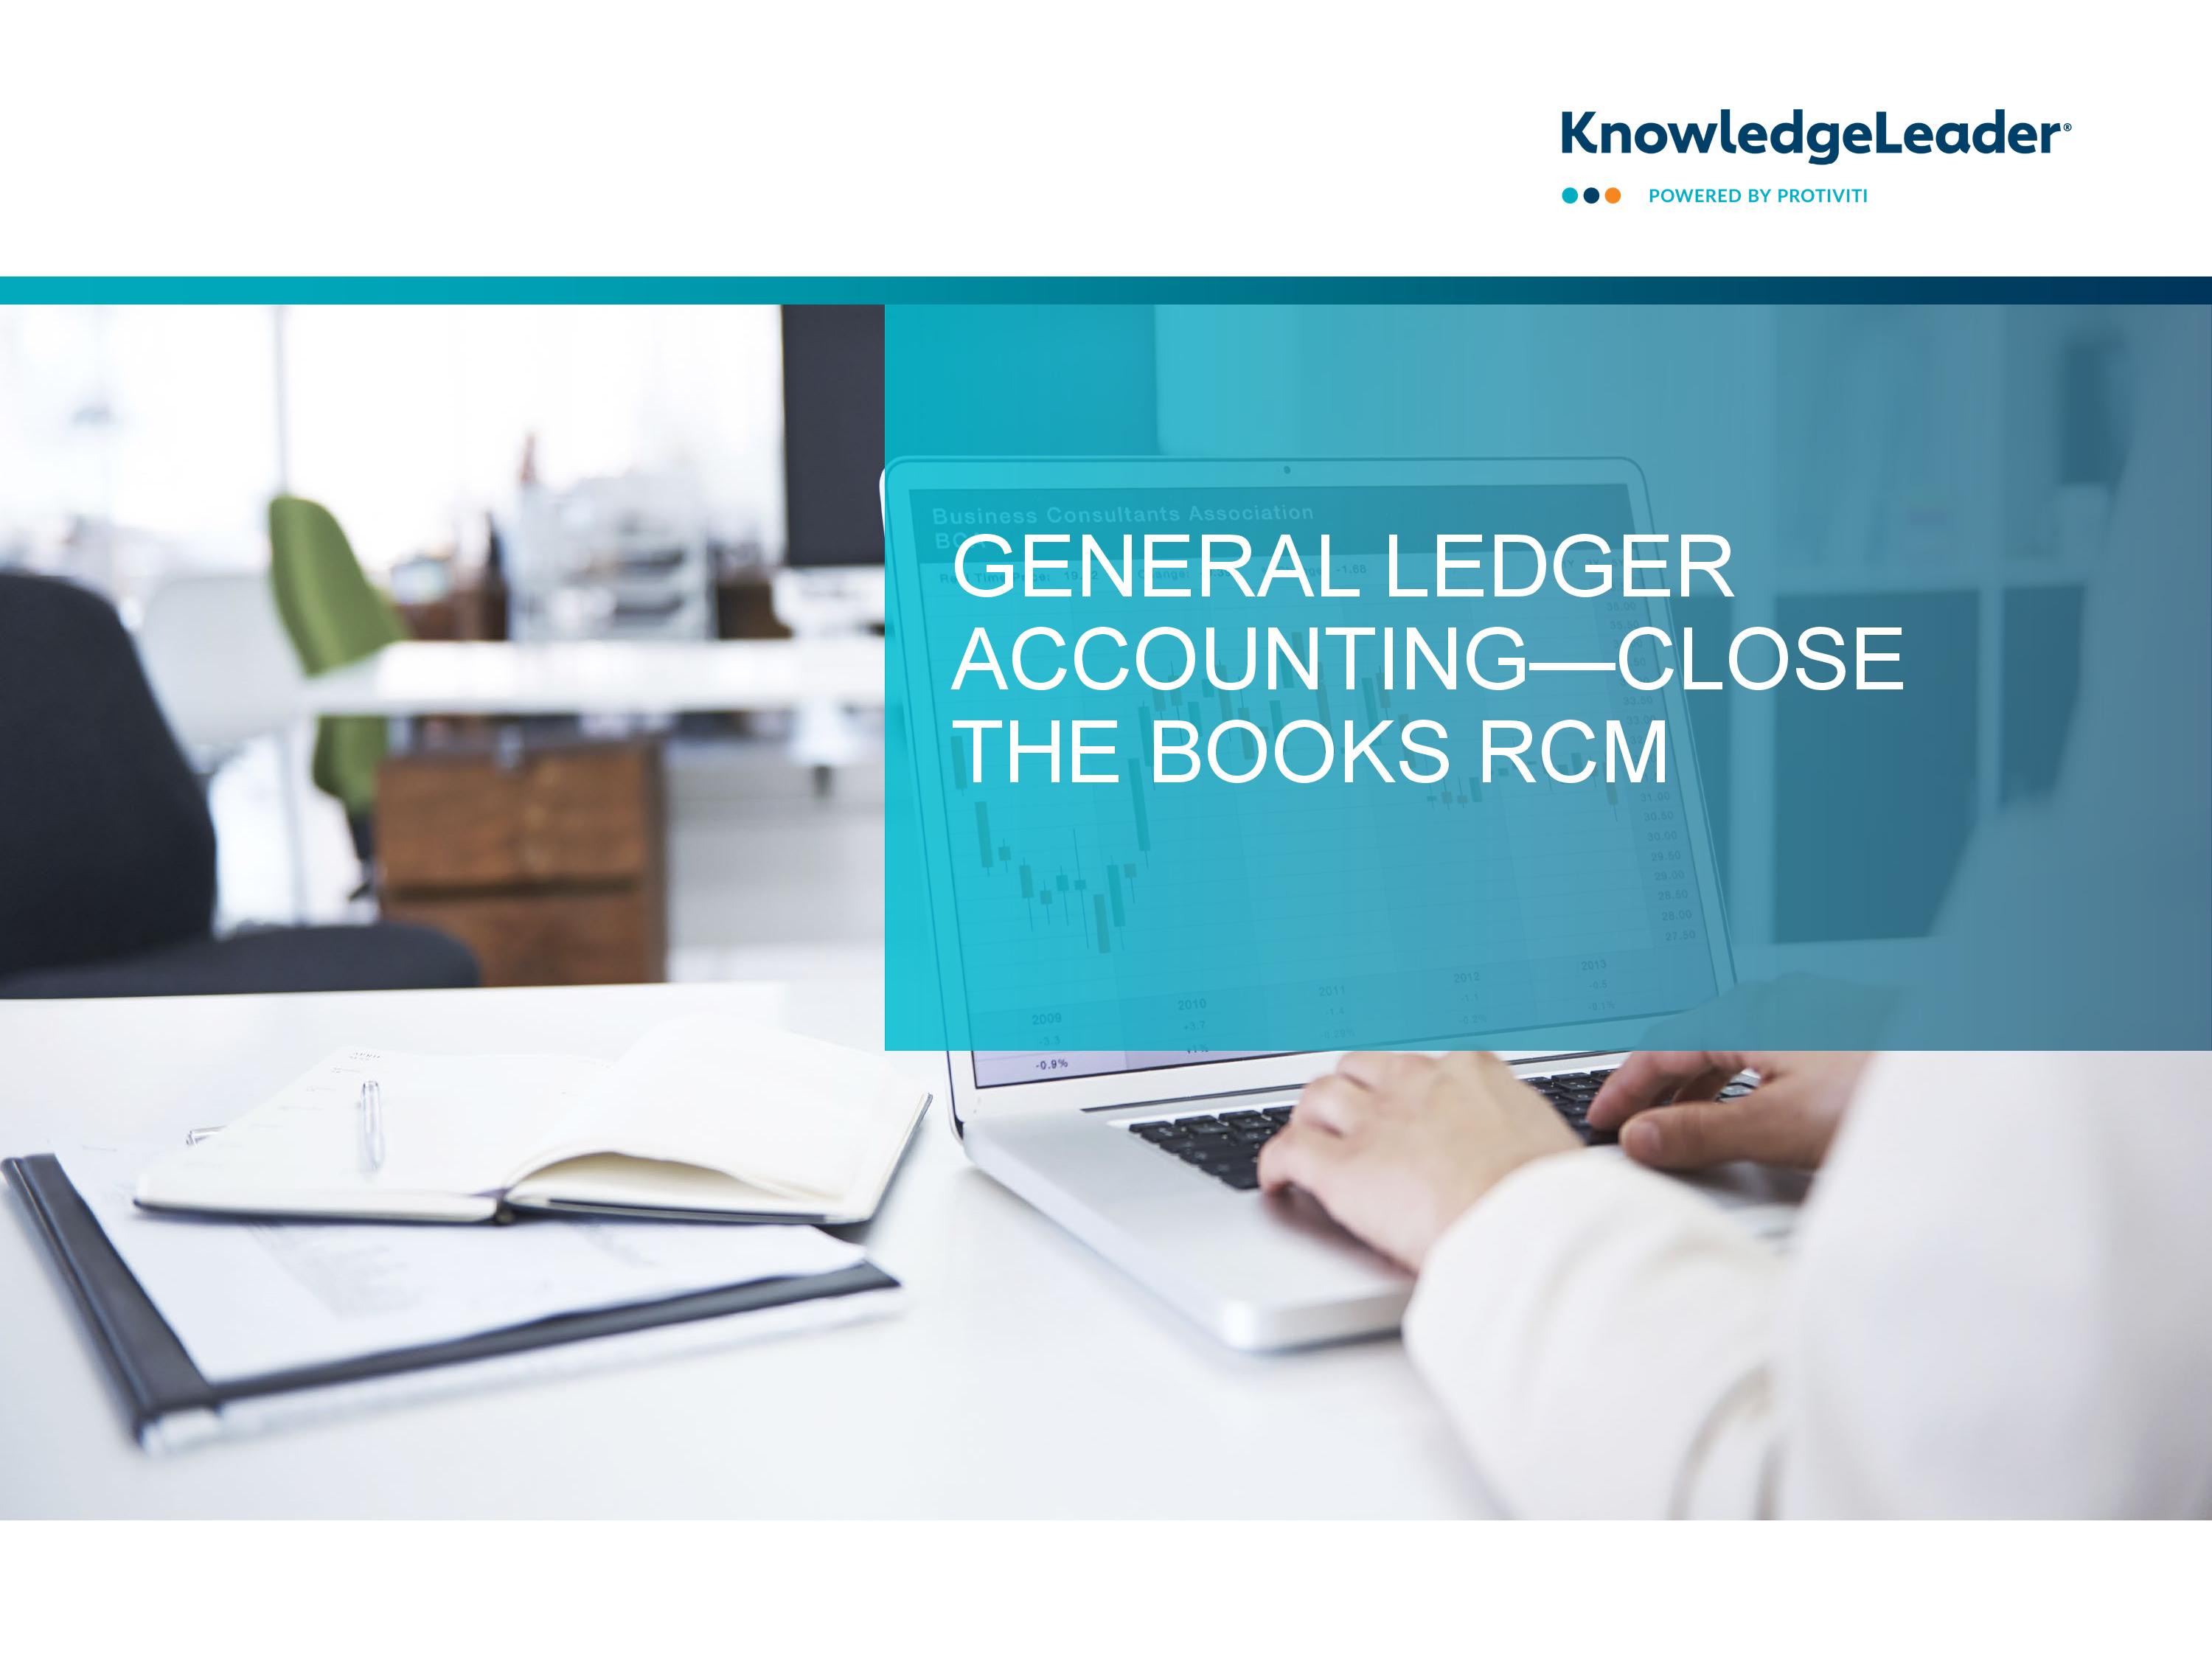 General Ledger Accounting—Close the Books RCM